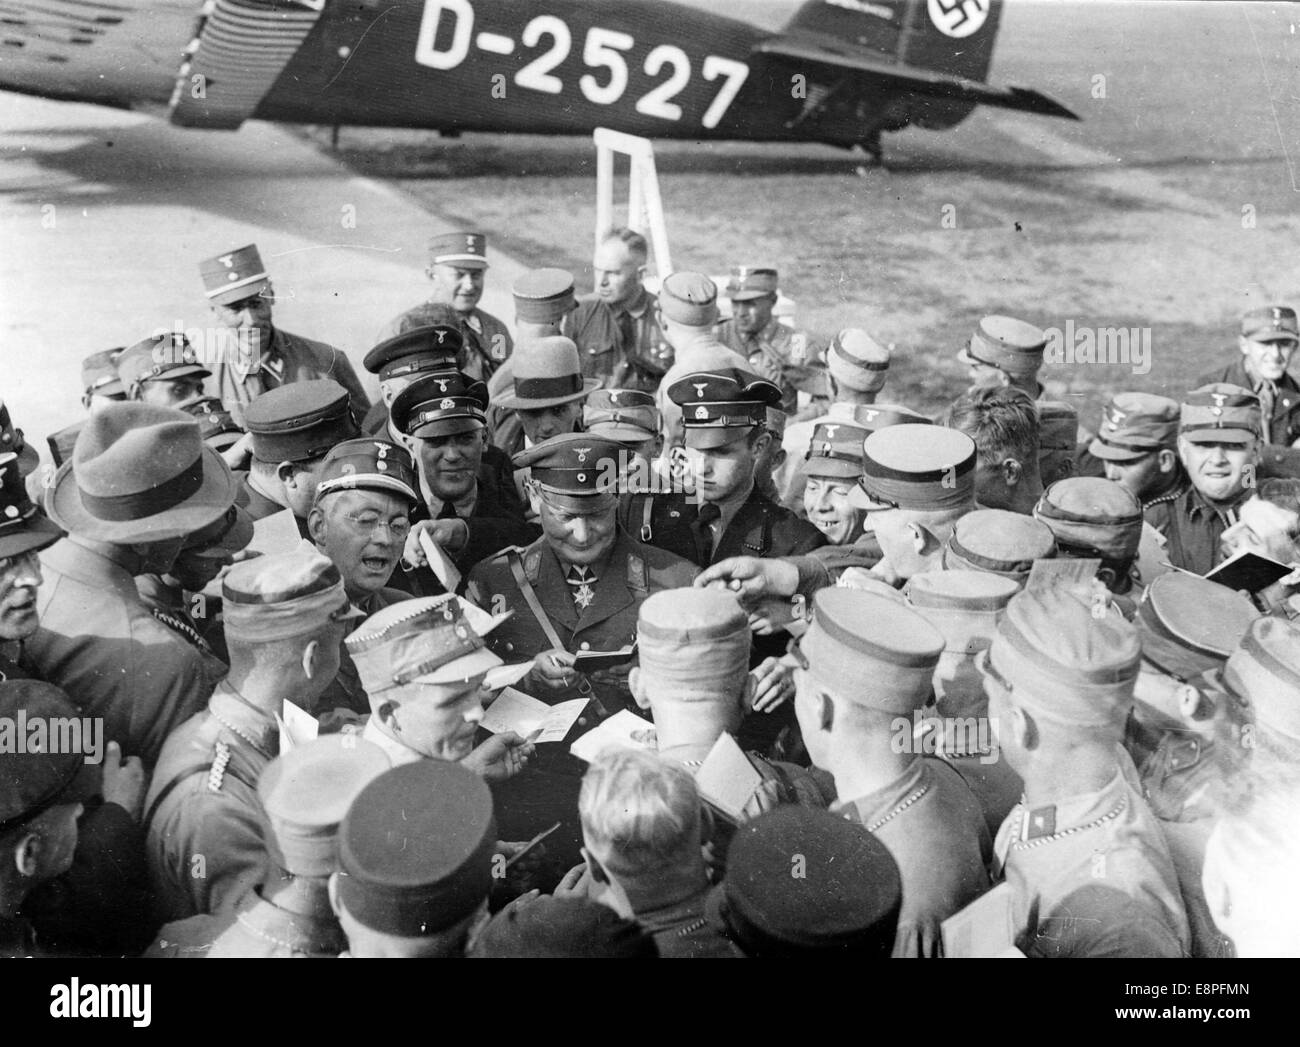 Nuremberg Rally 1933 in Nuremberg, Germany - Hermann Goering is surrounded by members of the SA (Sturmabteilung) as he signs autographs. (Flaws in quality due to the historic picture copy) Fotoarchiv für Zeitgeschichtee - NO WIRE SERVICE - Stock Photo